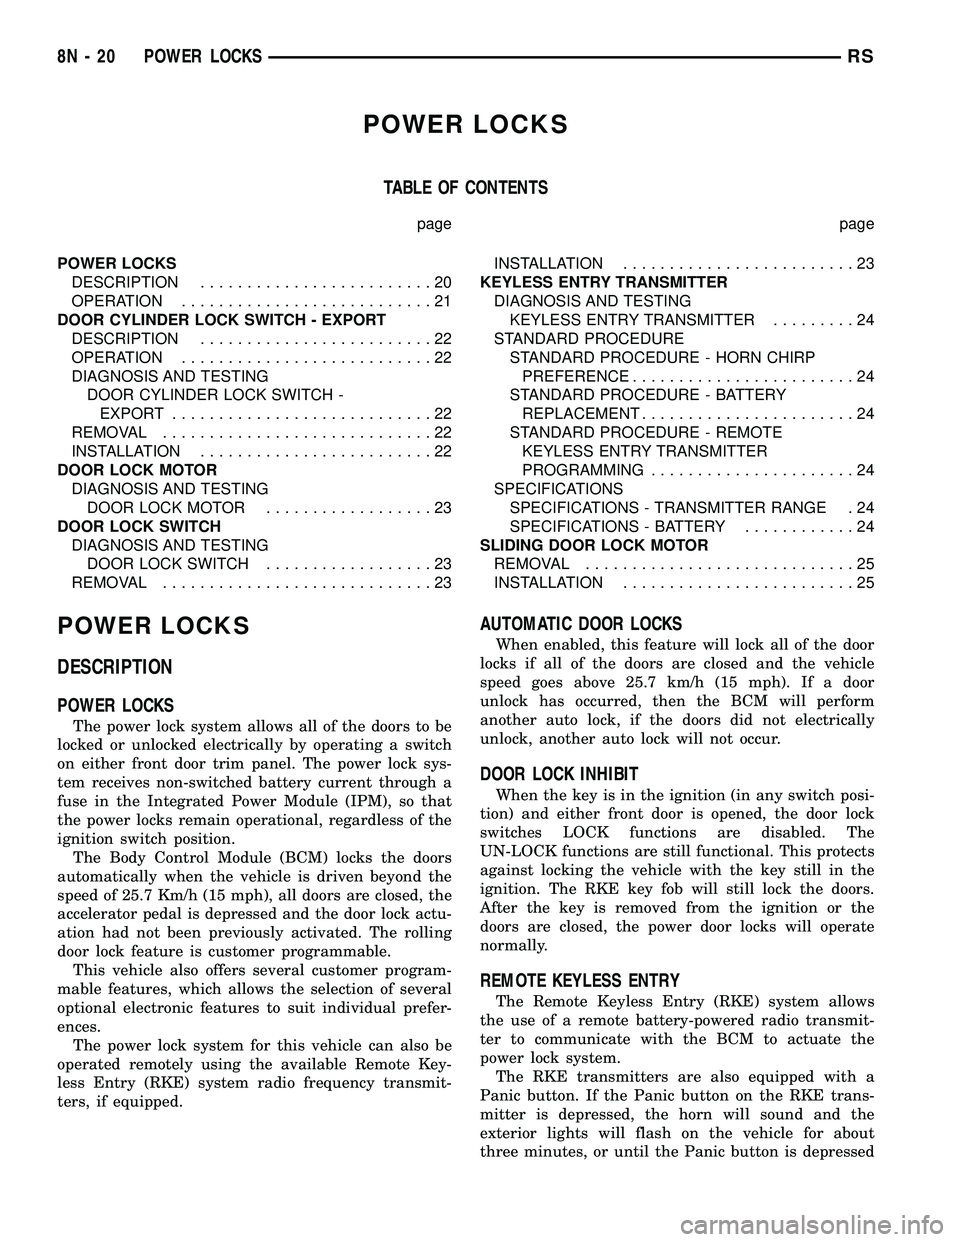 CHRYSLER VOYAGER 2005  Service Manual POWER LOCKS
TABLE OF CONTENTS
page page
POWER LOCKS
DESCRIPTION.........................20
OPERATION...........................21
DOOR CYLINDER LOCK SWITCH - EXPORT
DESCRIPTION........................